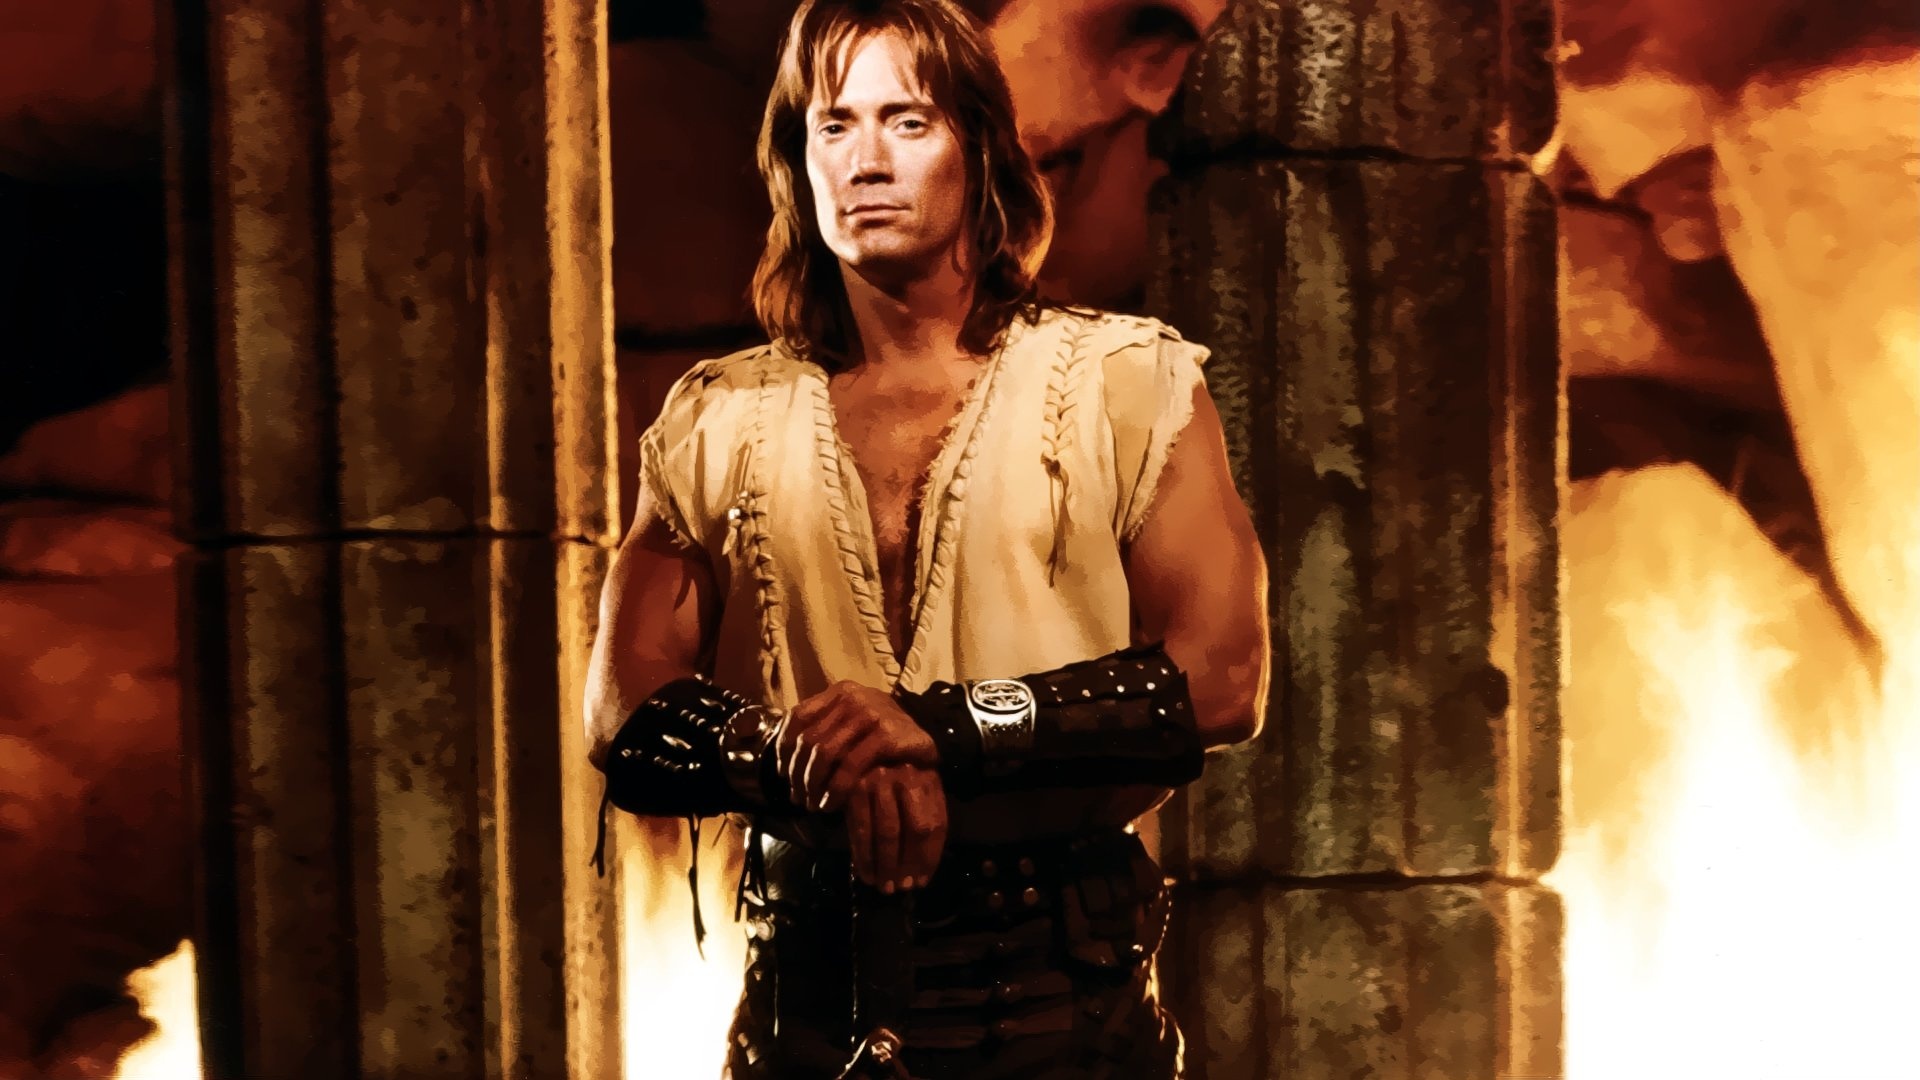 Hercules: The Legendary Journeys (TV Series): Kevin Sorbo, An American actor who played the main role in the action-adventure show. 1920x1080 Full HD Background.